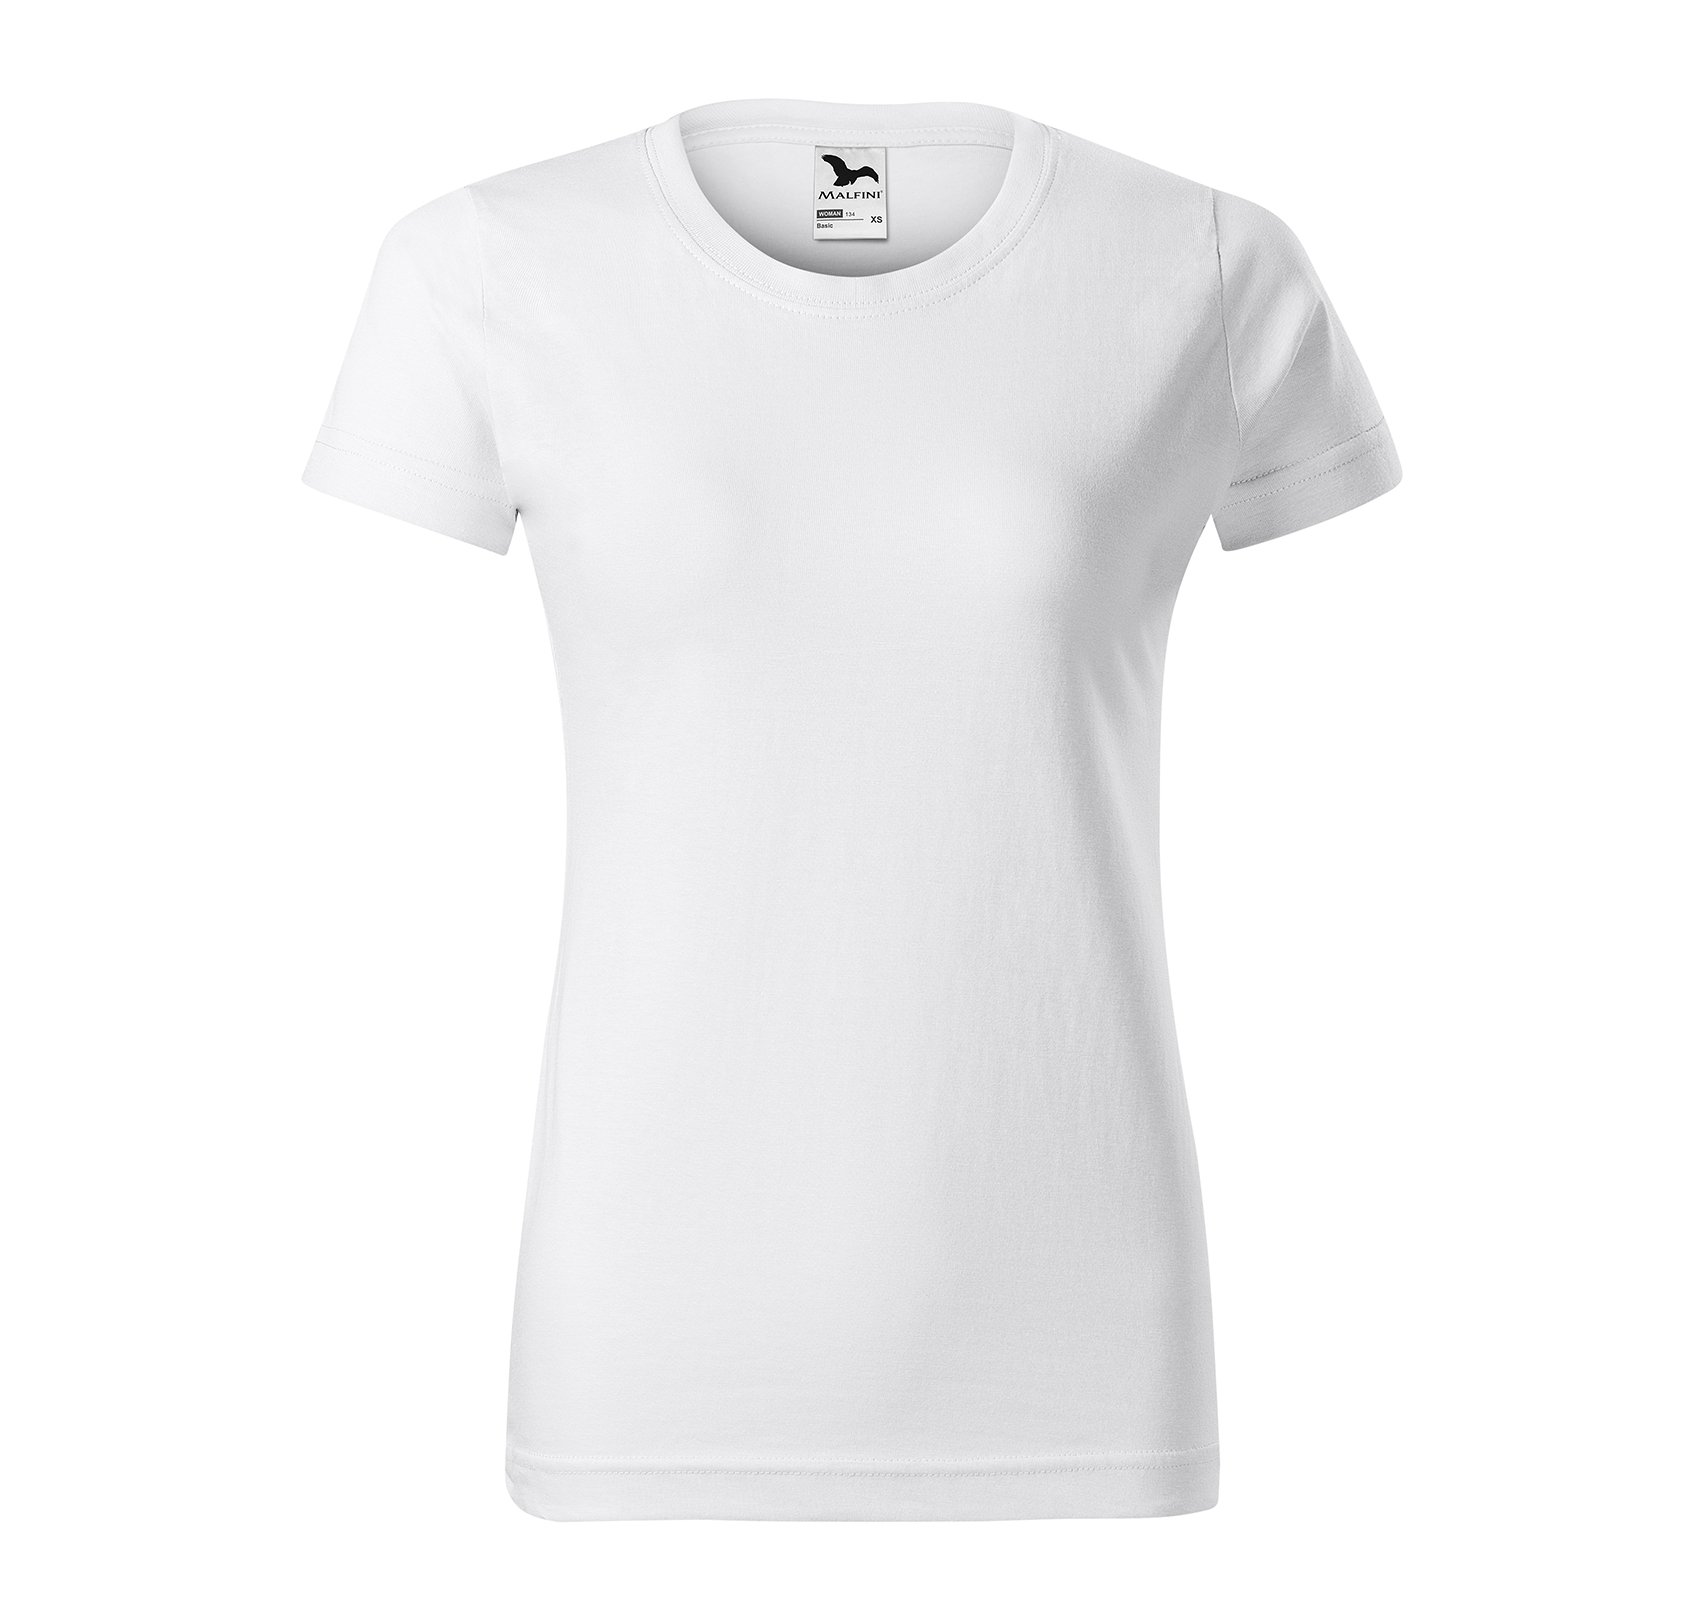 Women's T-shirt BASIC 160 with your LOGO